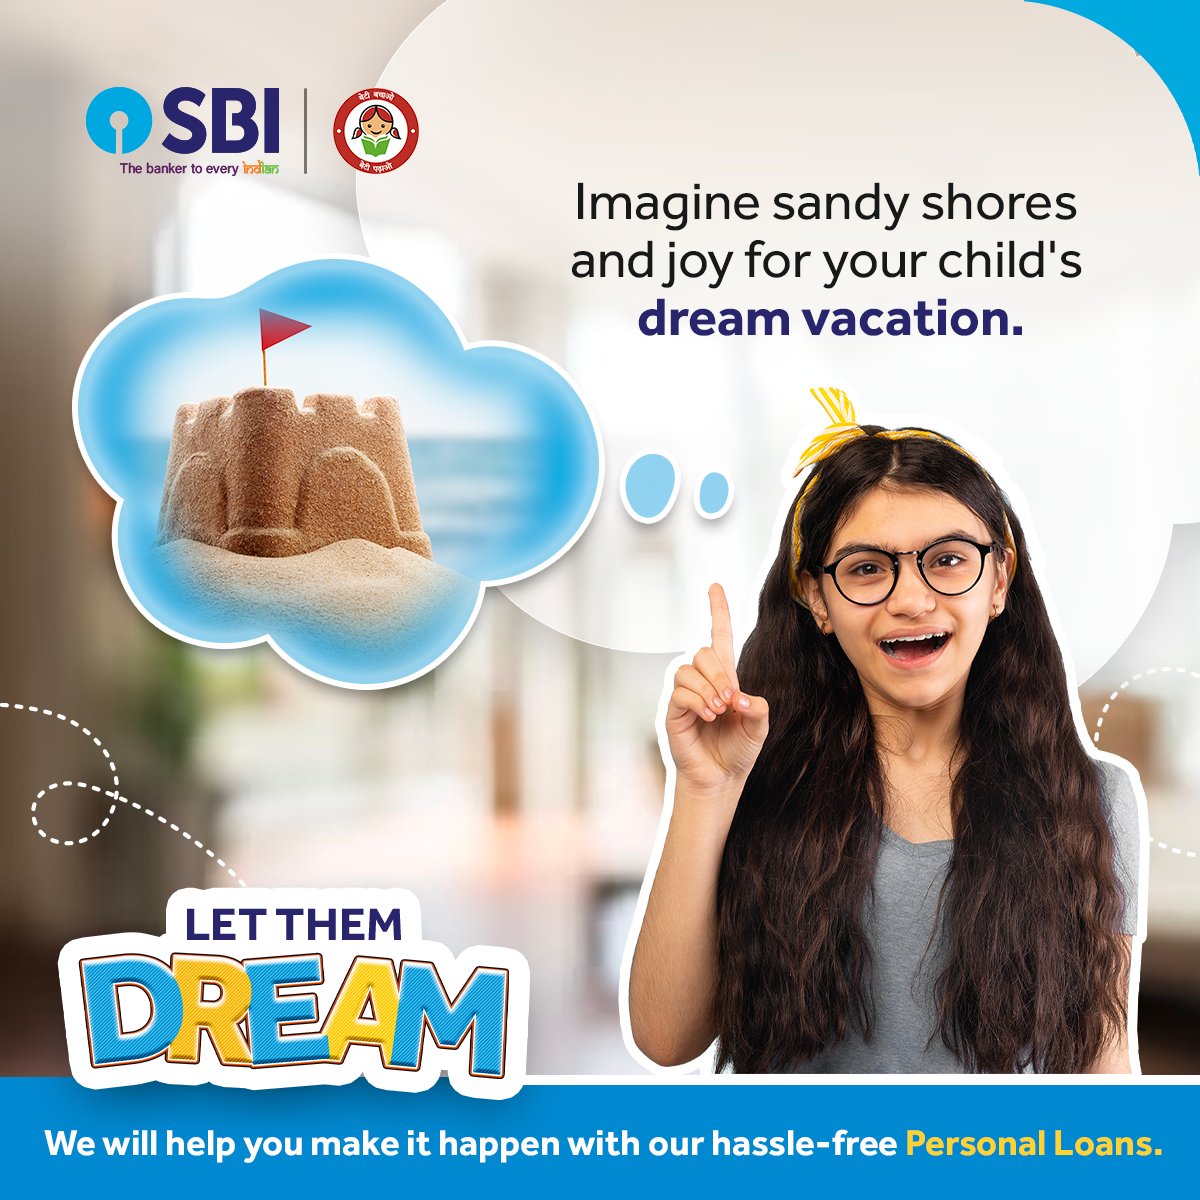 Dreaming of a seaside vacation with a touch of waves and sand? SBI will help you make it happen with our hassle-free Personal Loans.

Apply Now: bank.sbi/web/personal-b…

#SBI #PersonalLoan #PersonalBanking #LetThemDream #DeshKaFan #TheBankerToEveryIndian